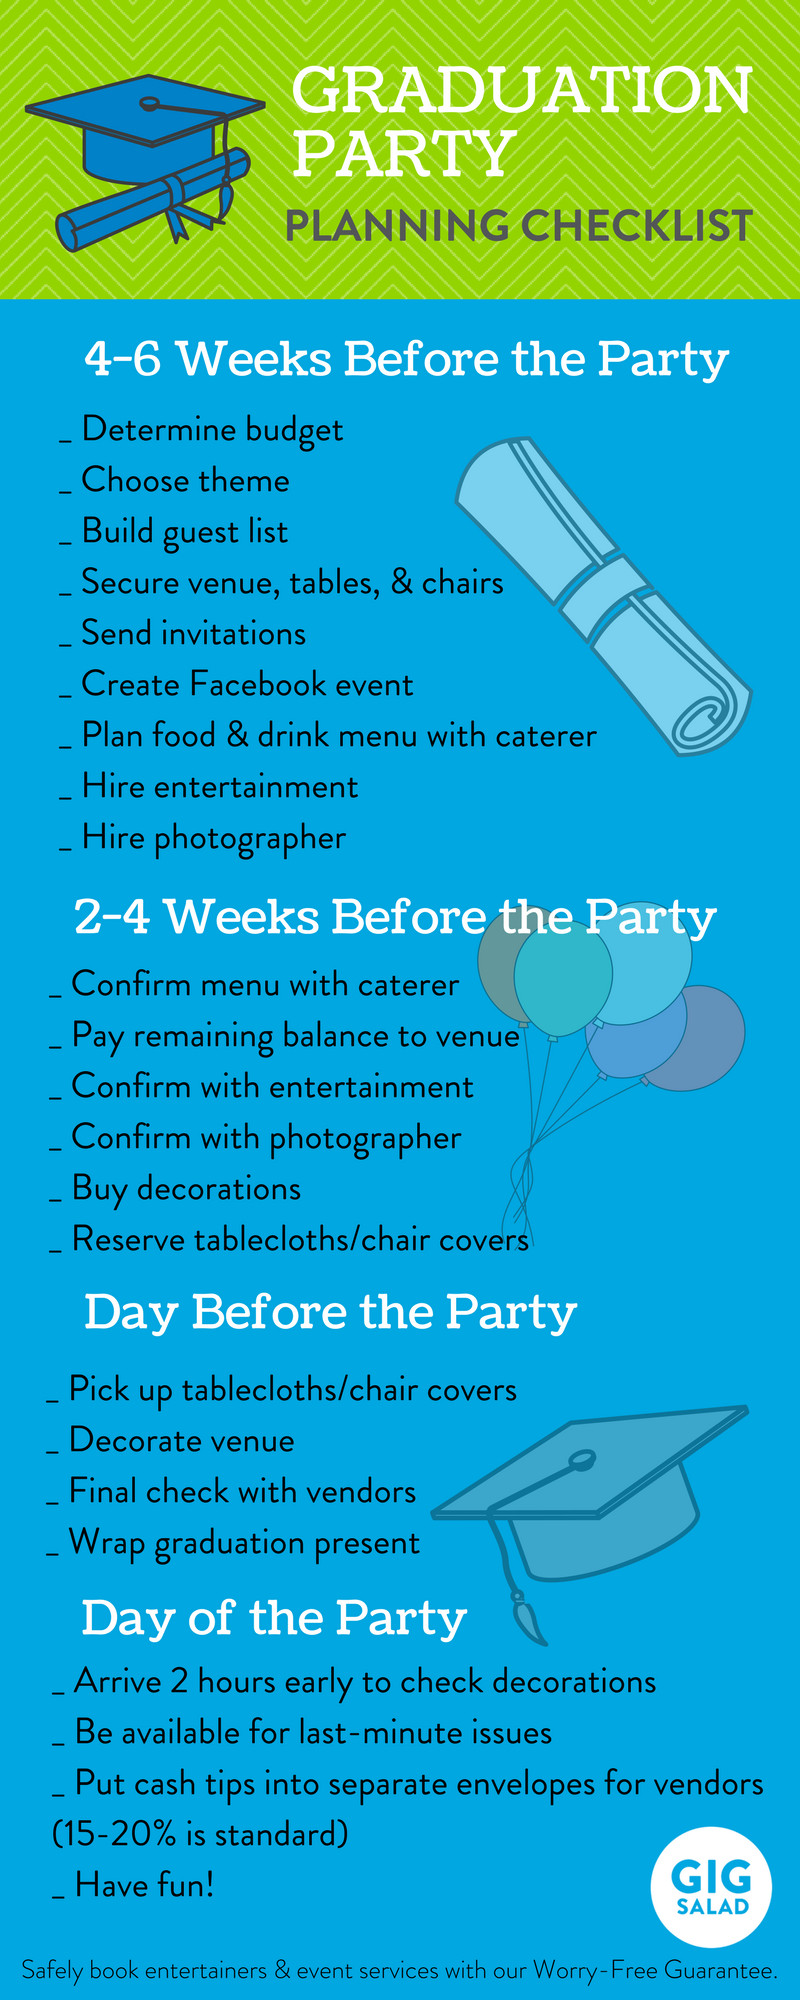 Party Planning Ideas For Graduation
 Planning a party for your favorite grad This graduation